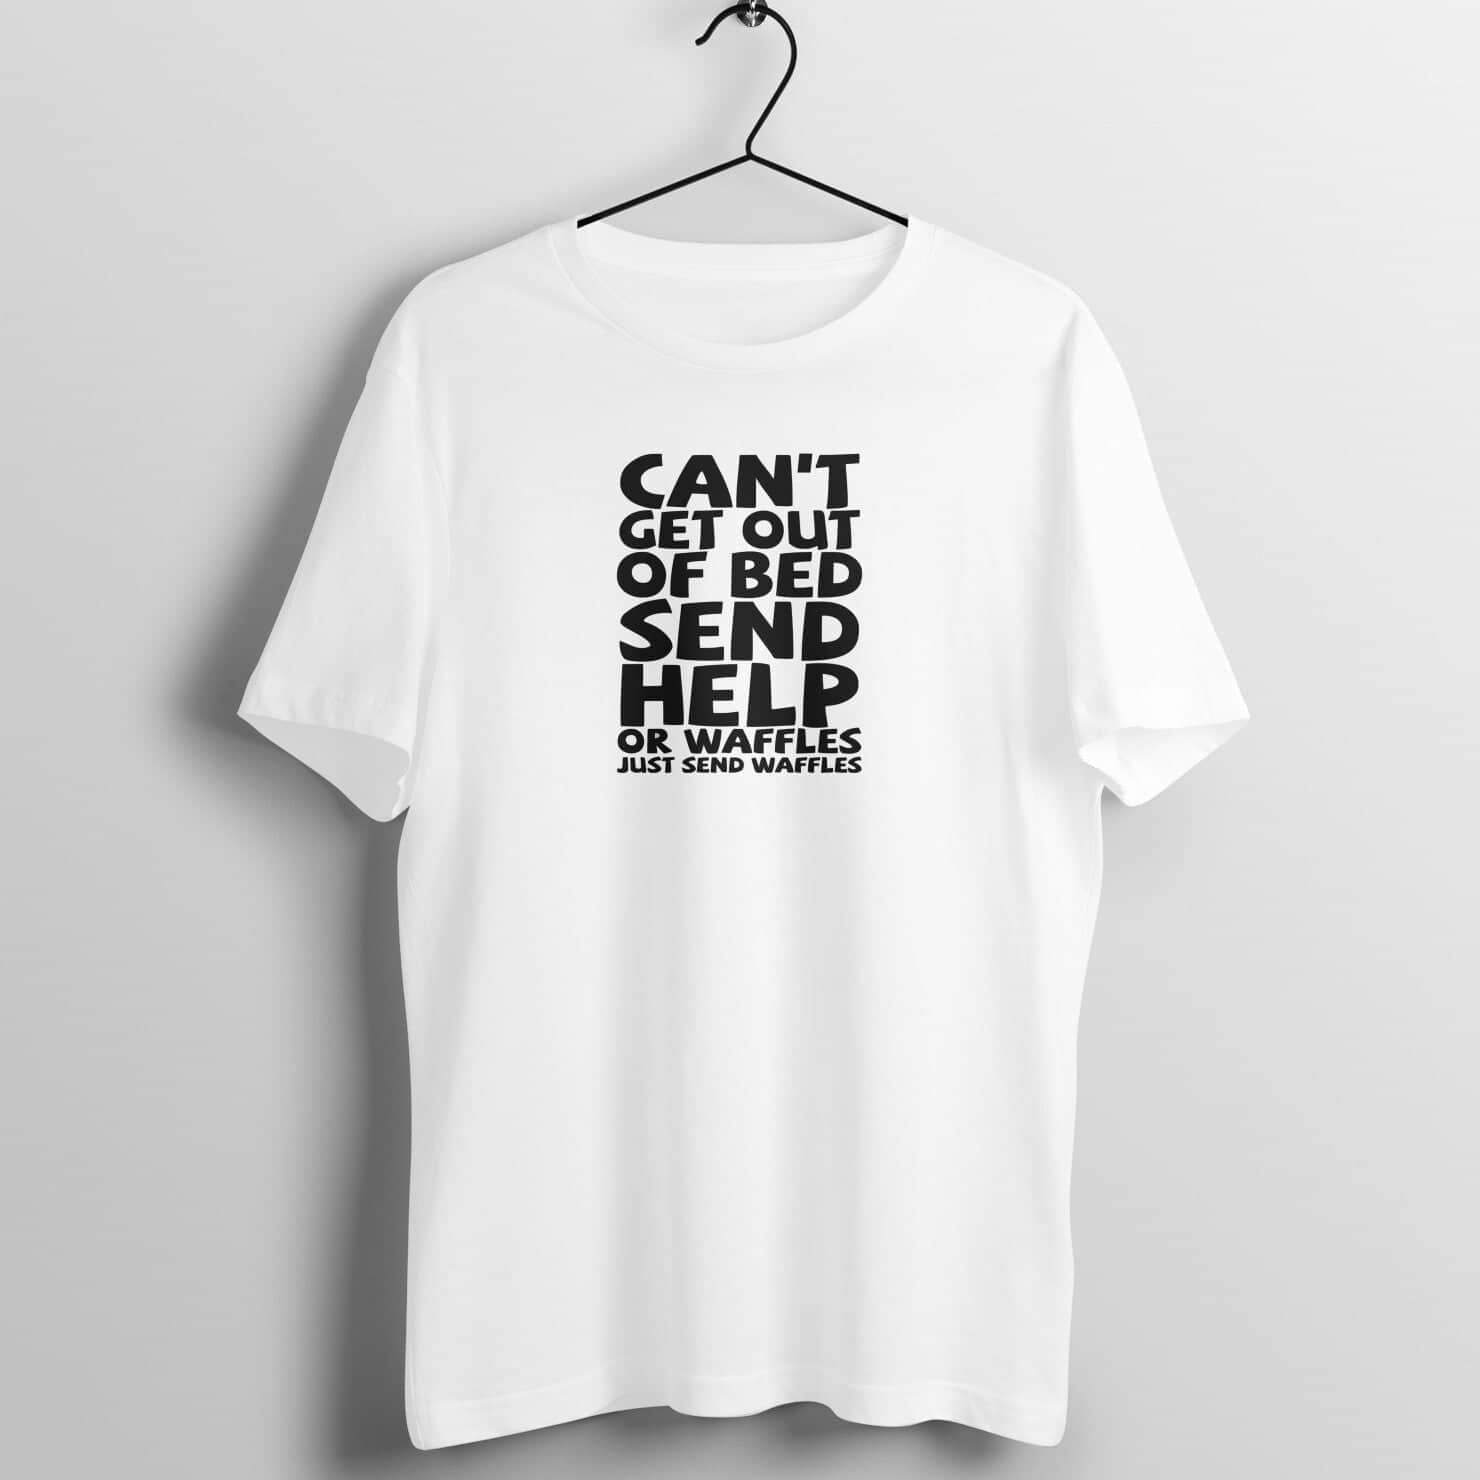 Cant Get Out of Bed Send Help or Waffles Funny White T Shirt for Men and Women freeshipping - Catch My Drift India